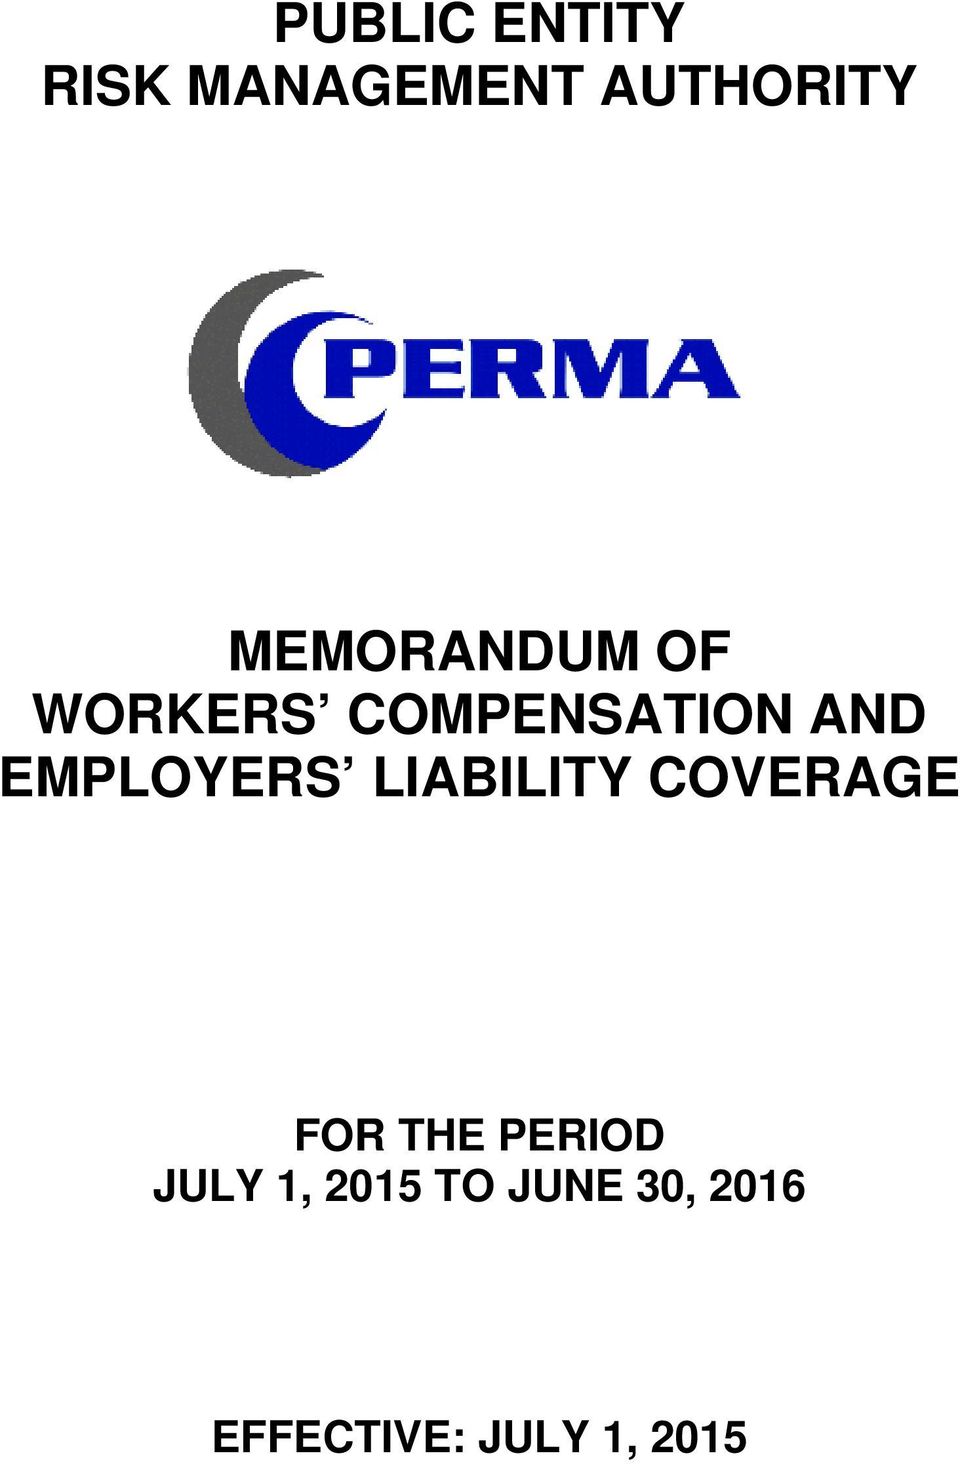 EMPLOYERS LIABILITY COVERAGE FOR THE PERIOD